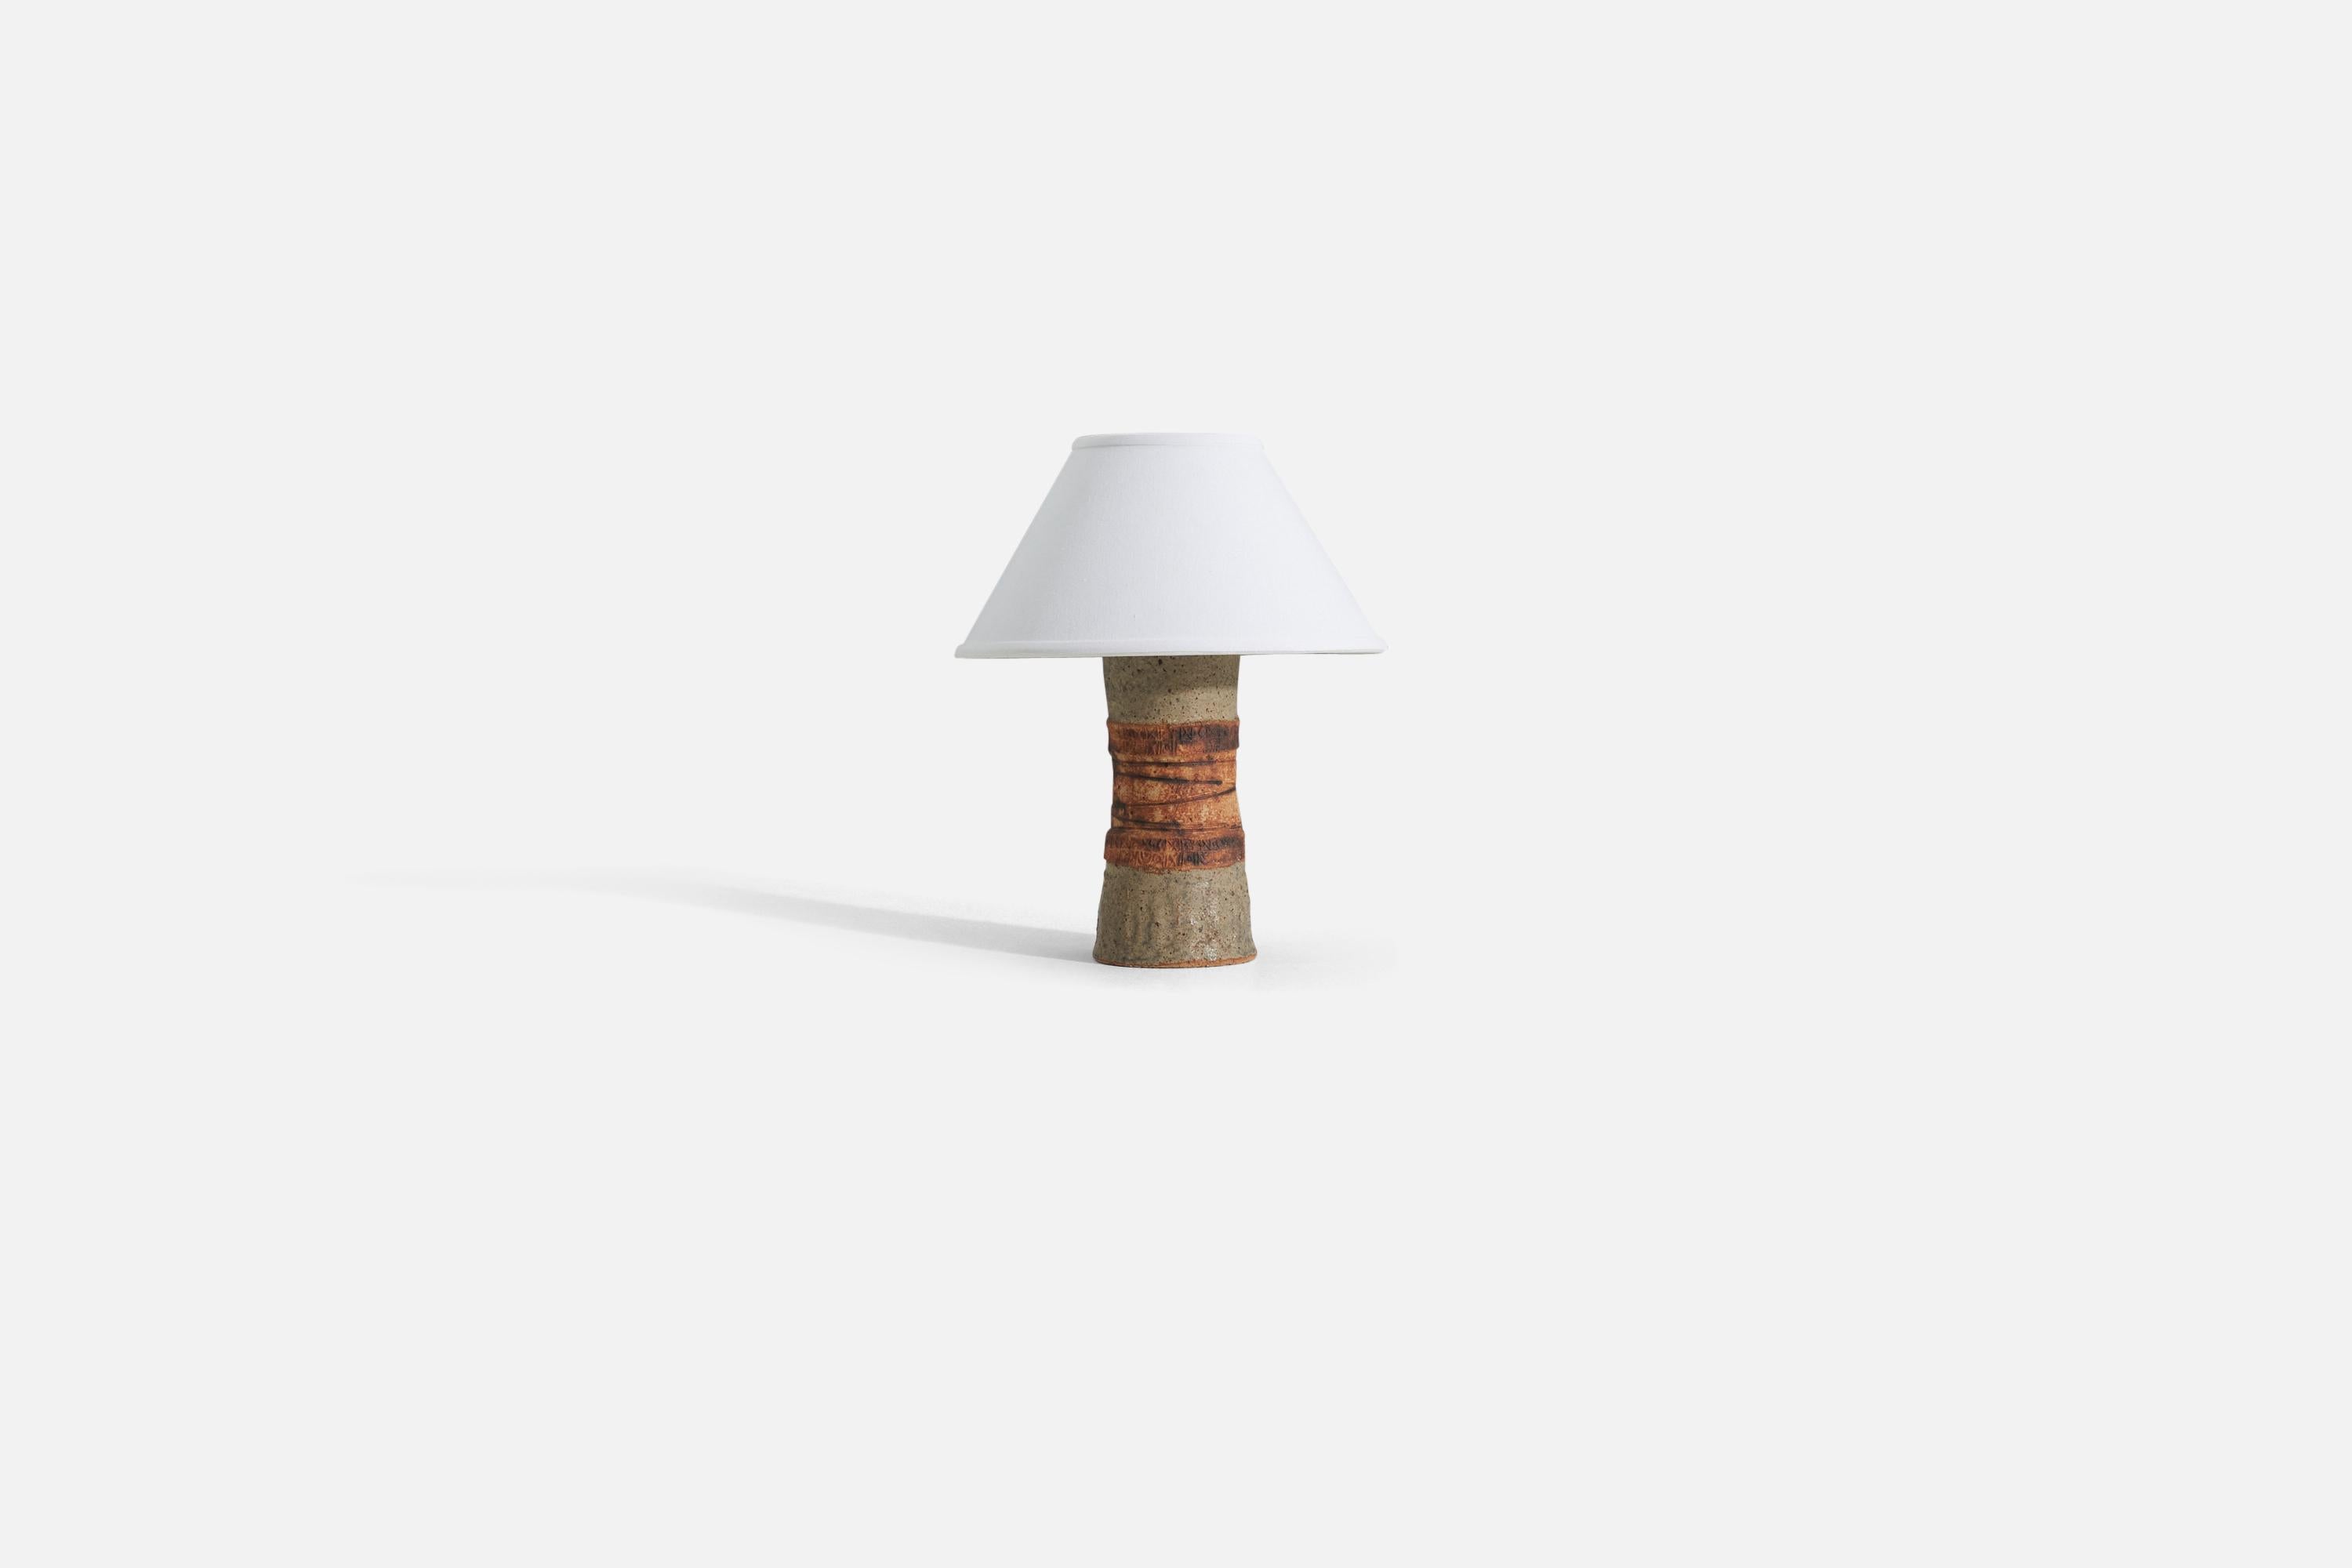 A stoneware table lamp produced in Sweden, 1960s.

Sold without lampshade. 
Dimensions of Lamp (inches) : 12 x 4.75 x 4.75 (H x W x D)
Dimensions of Shade (inches) : 5 x 12.25 x 7.25 (T x B x H)
Dimension of Lamp with shade (inches) : 15 x